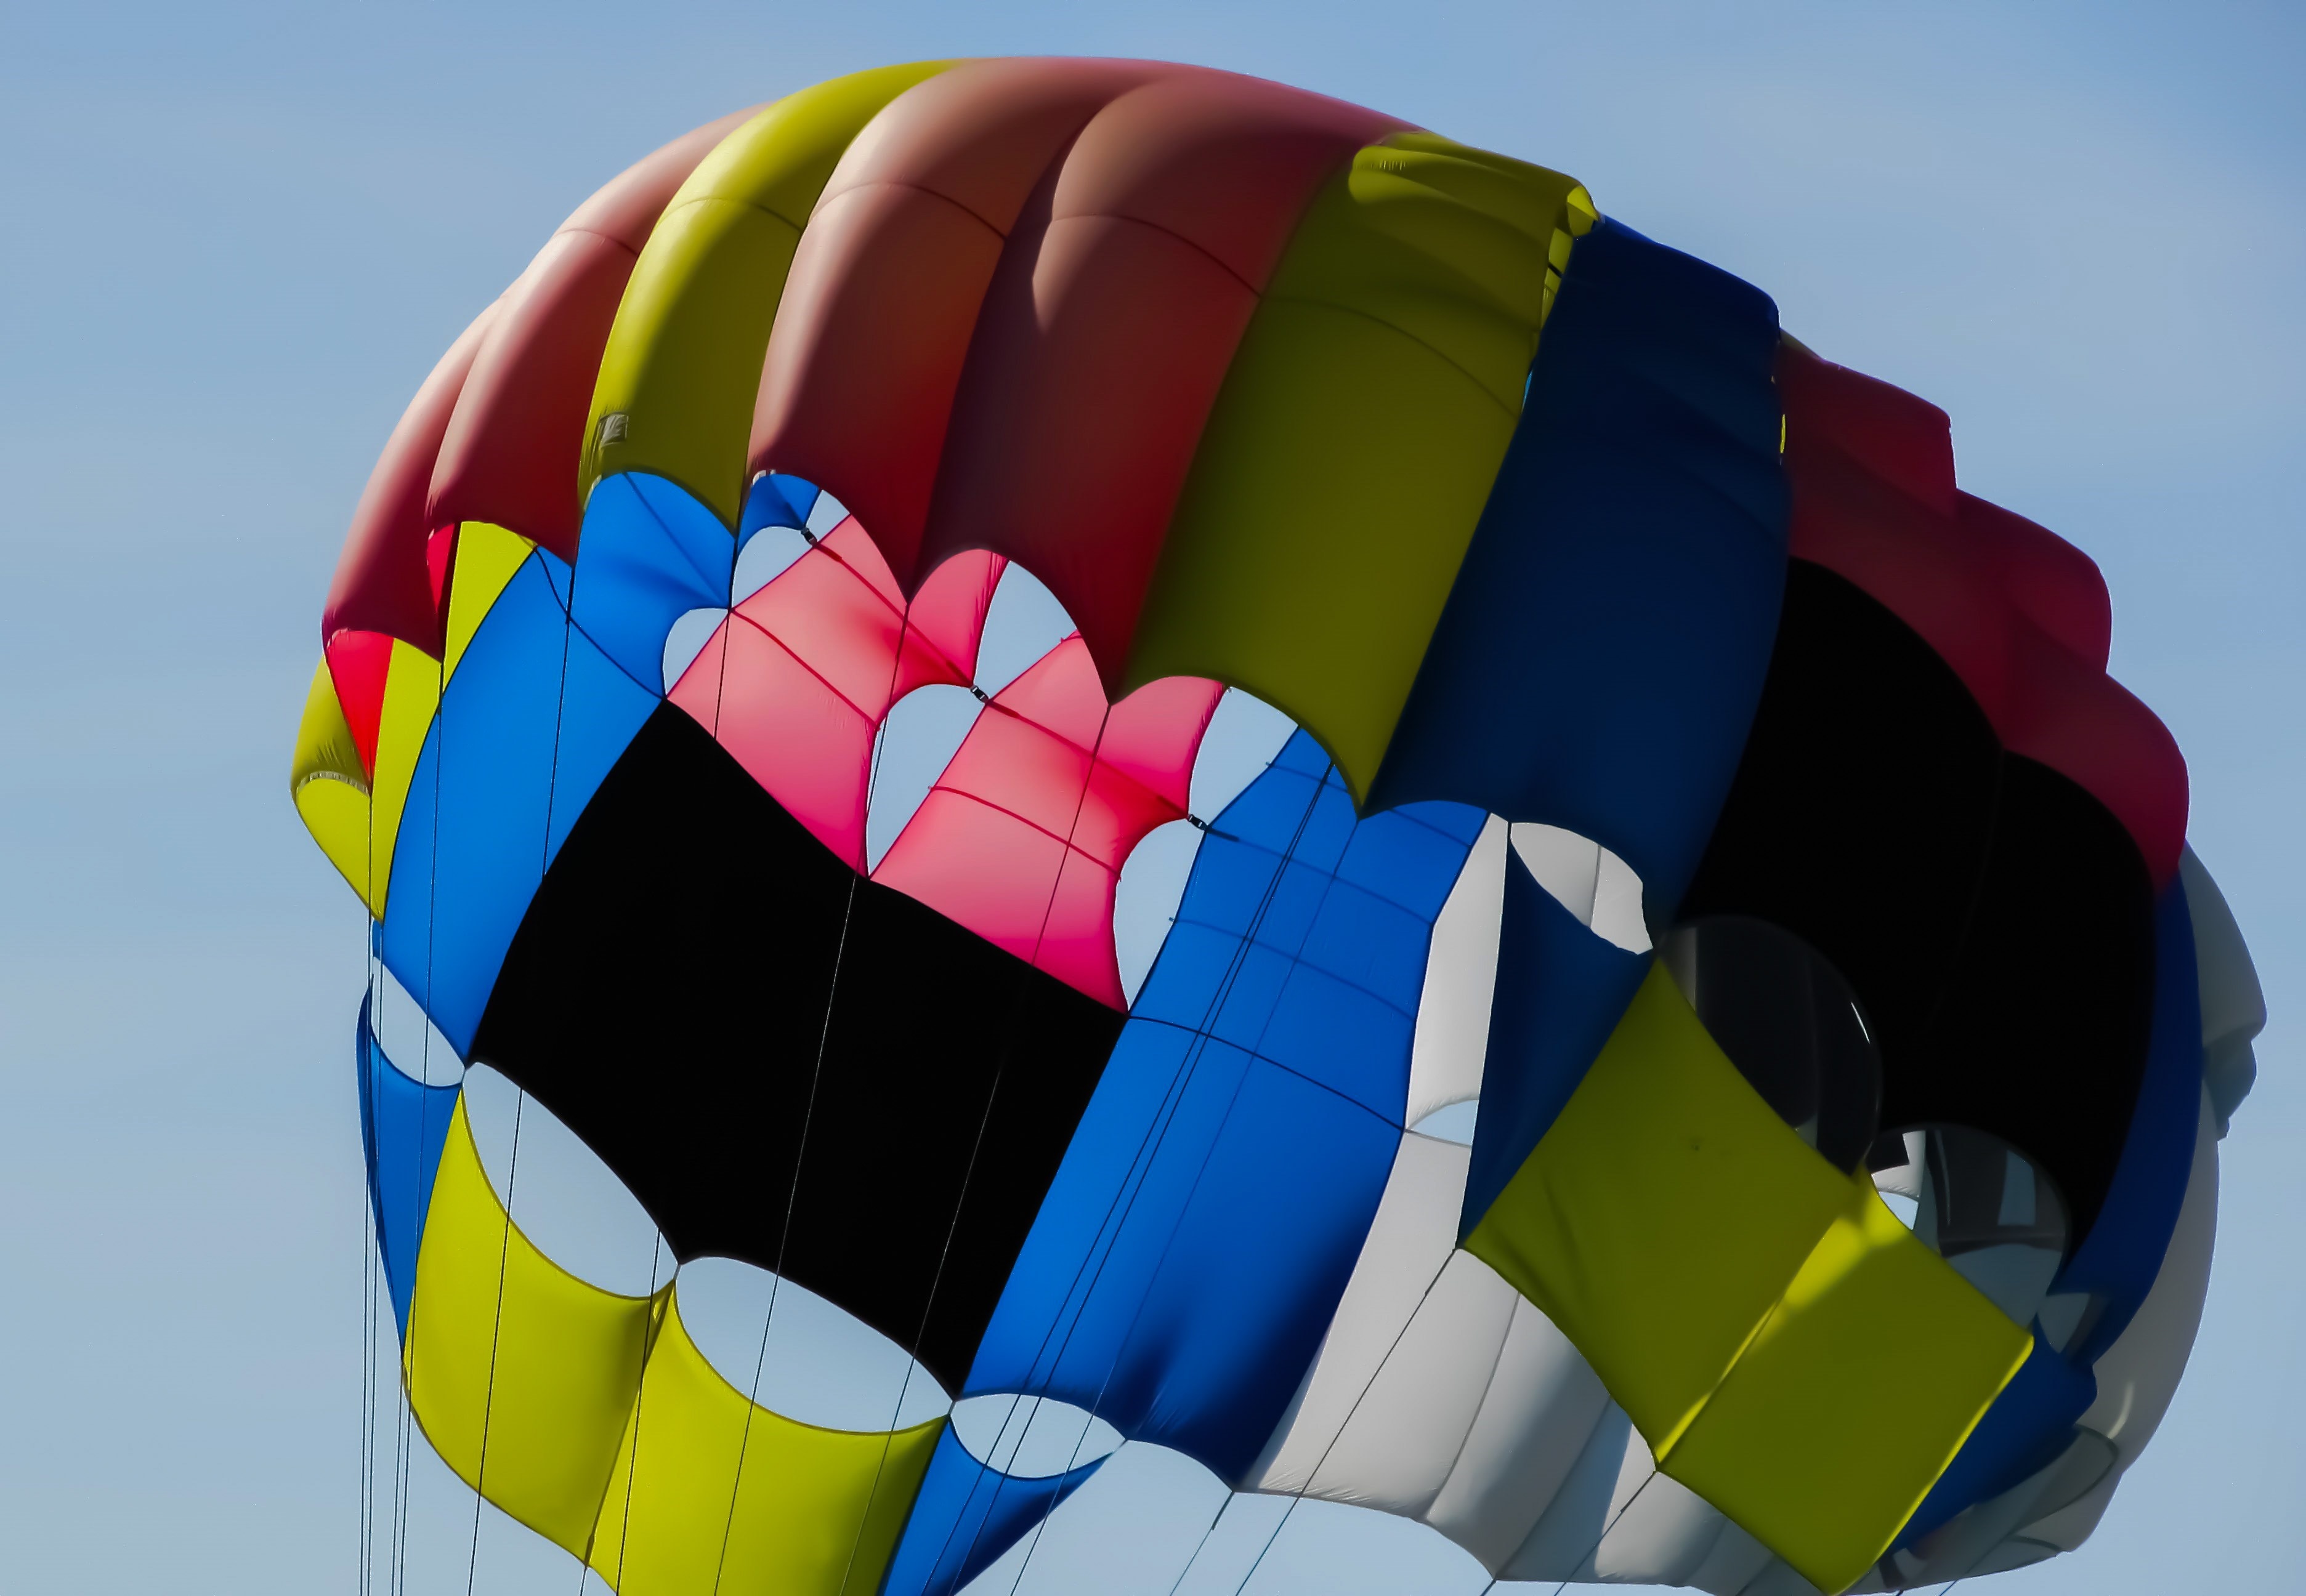 blue, red, and white hot air balloon